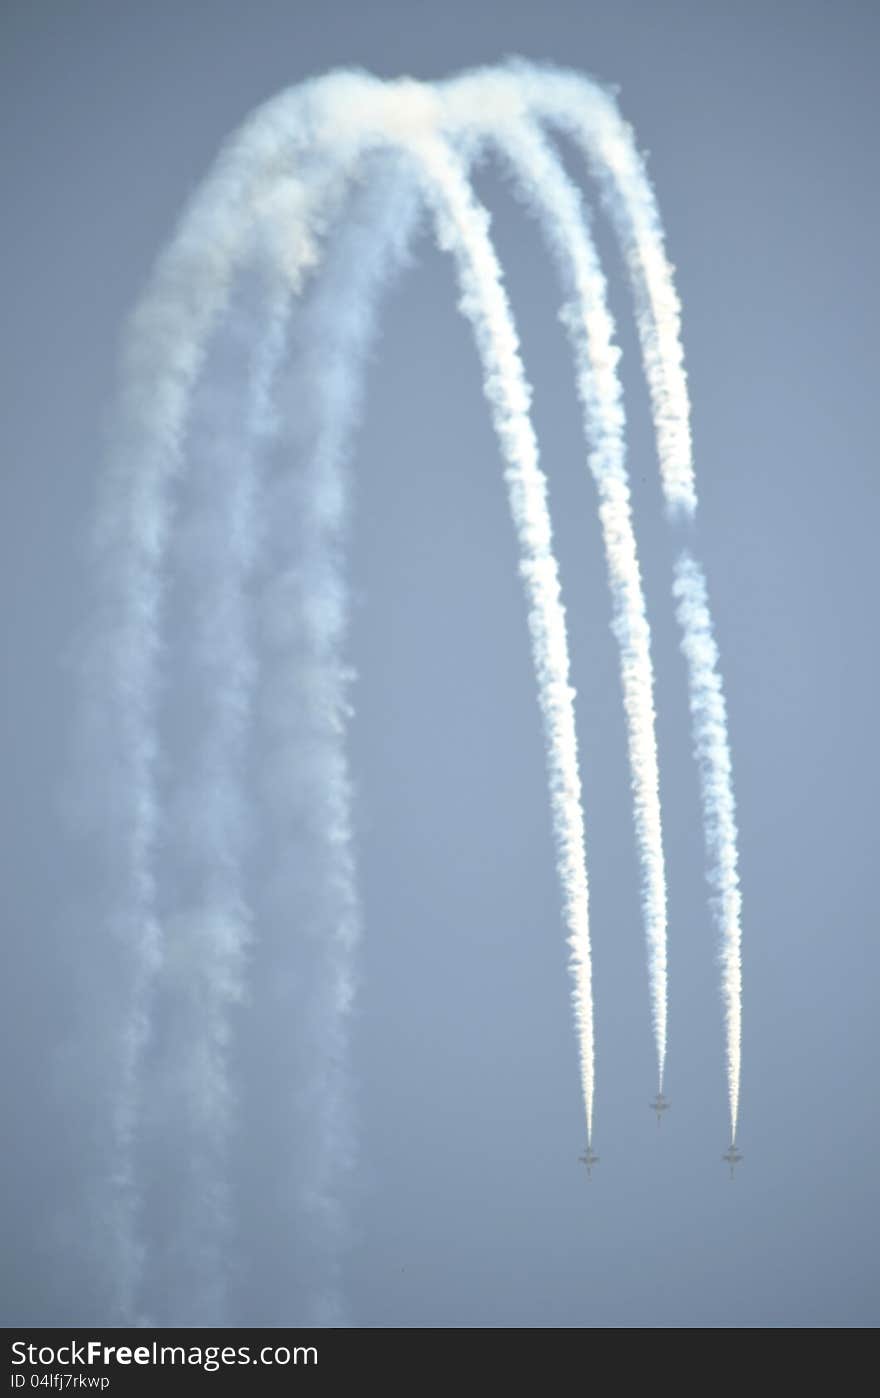 Aircrafts demonstrating acrobatics on an Air Show